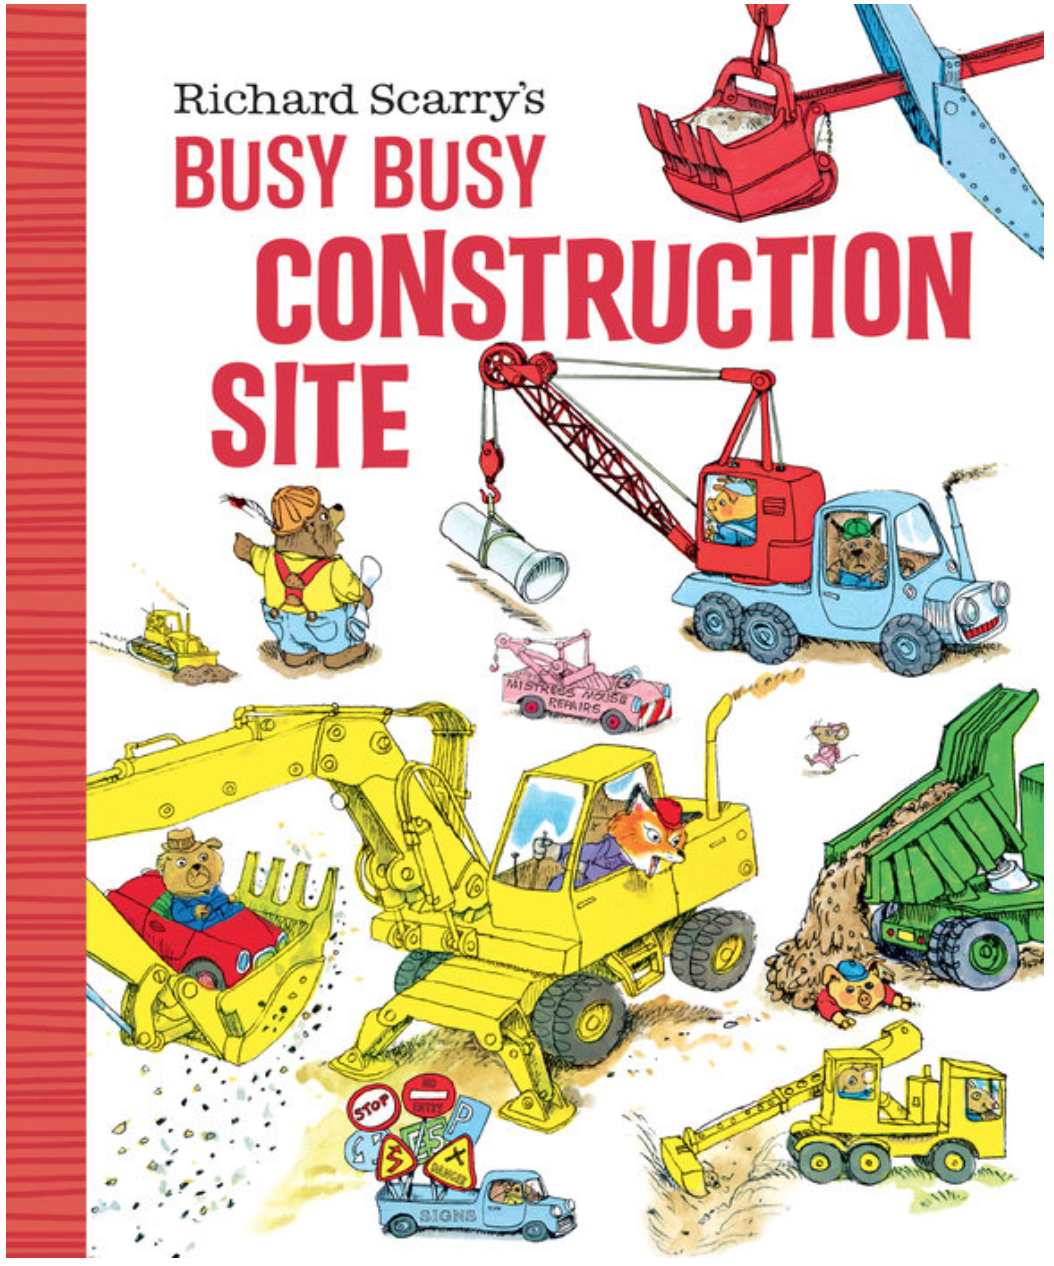 Richard Scarry's Busy Busy Construction Site